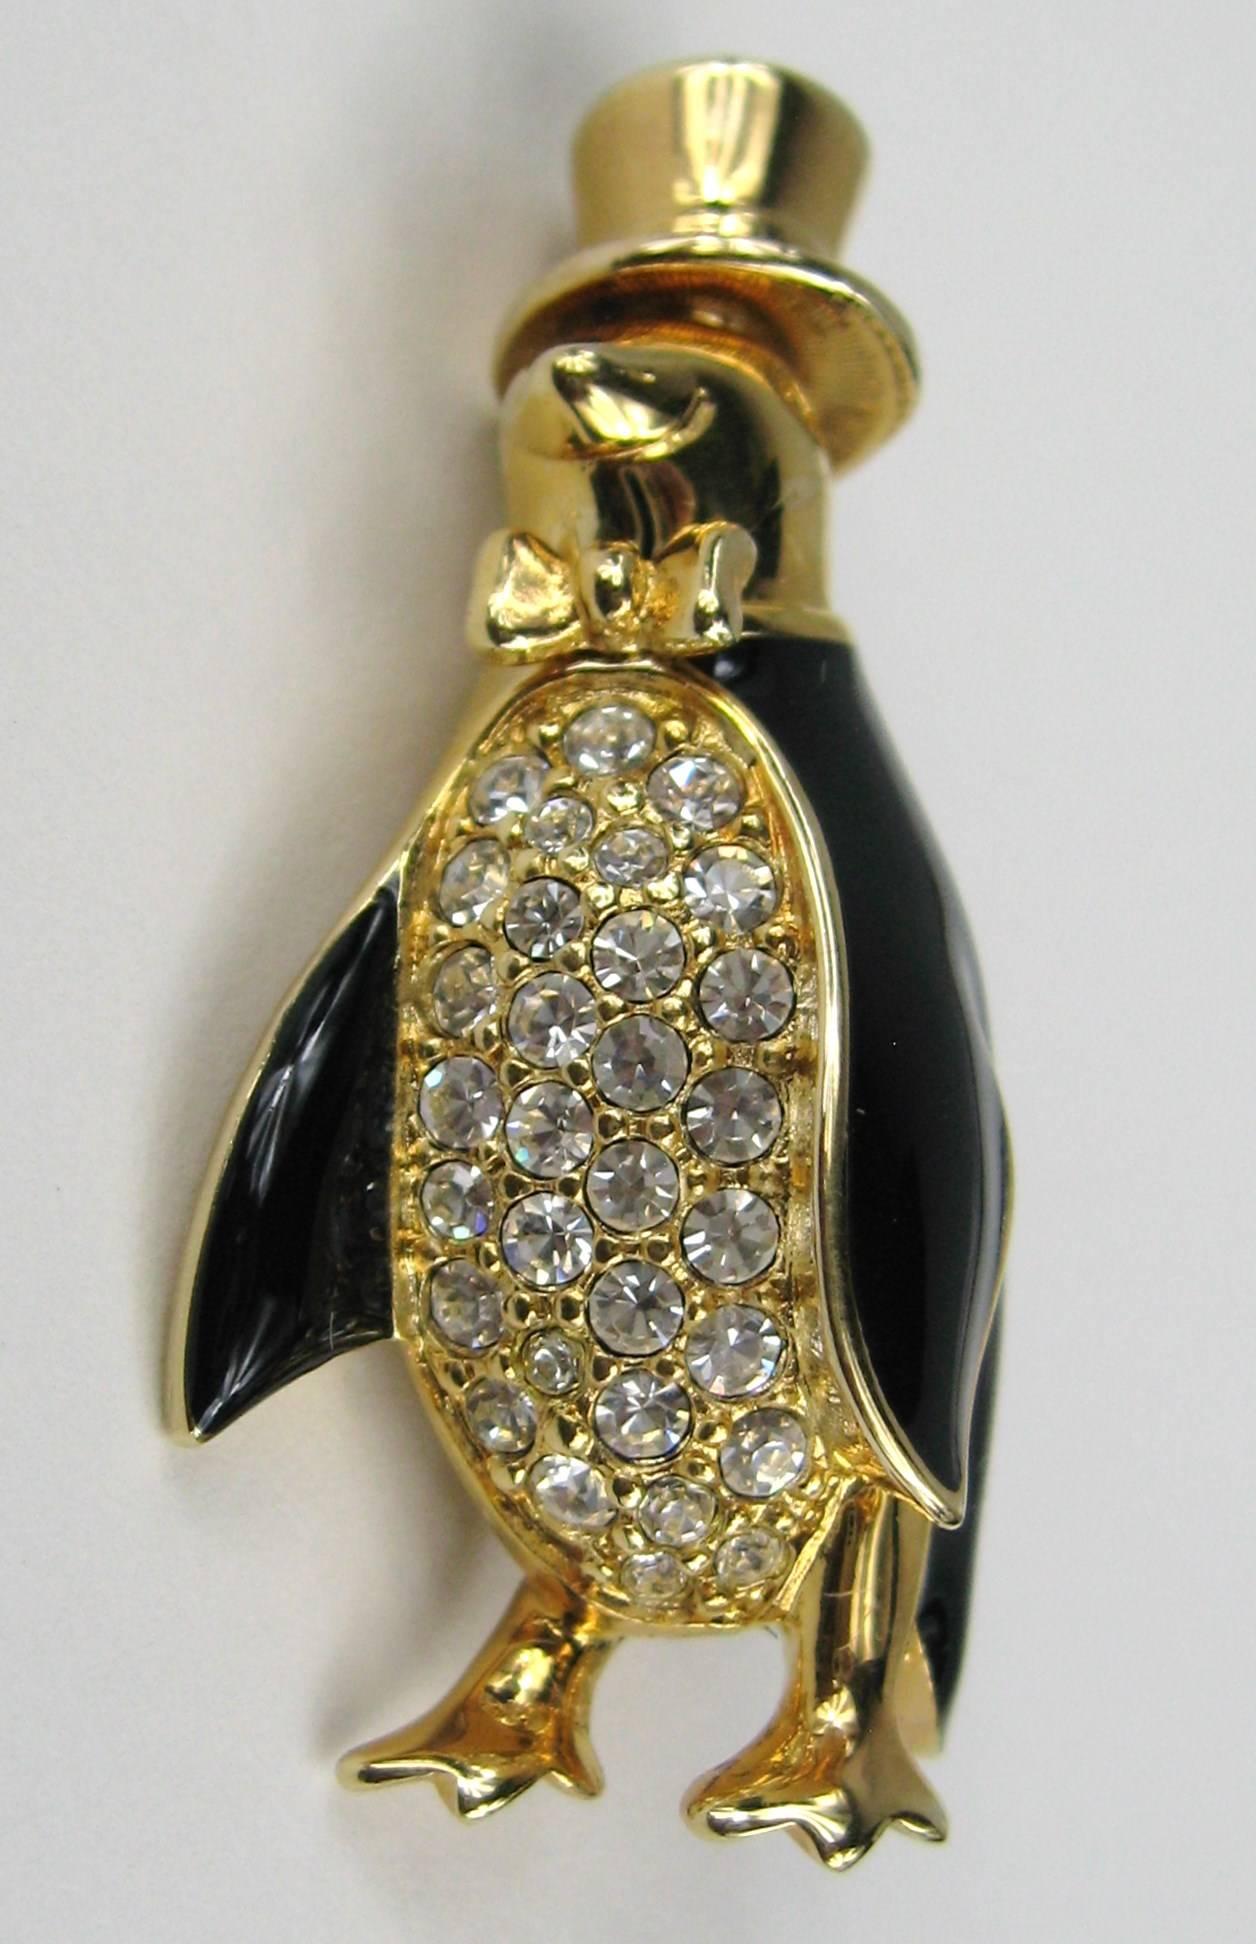 Stunning Swarovski Vintage Penguin Brooch. Adorable He is wearing a TOP HAT! Great Sparkle! As with most of this collection, it sure makes a statement! 43.43 mm or 1.71 in Top to Bottom x 21.26 mm or .83 in wide. This is out of a massive collection